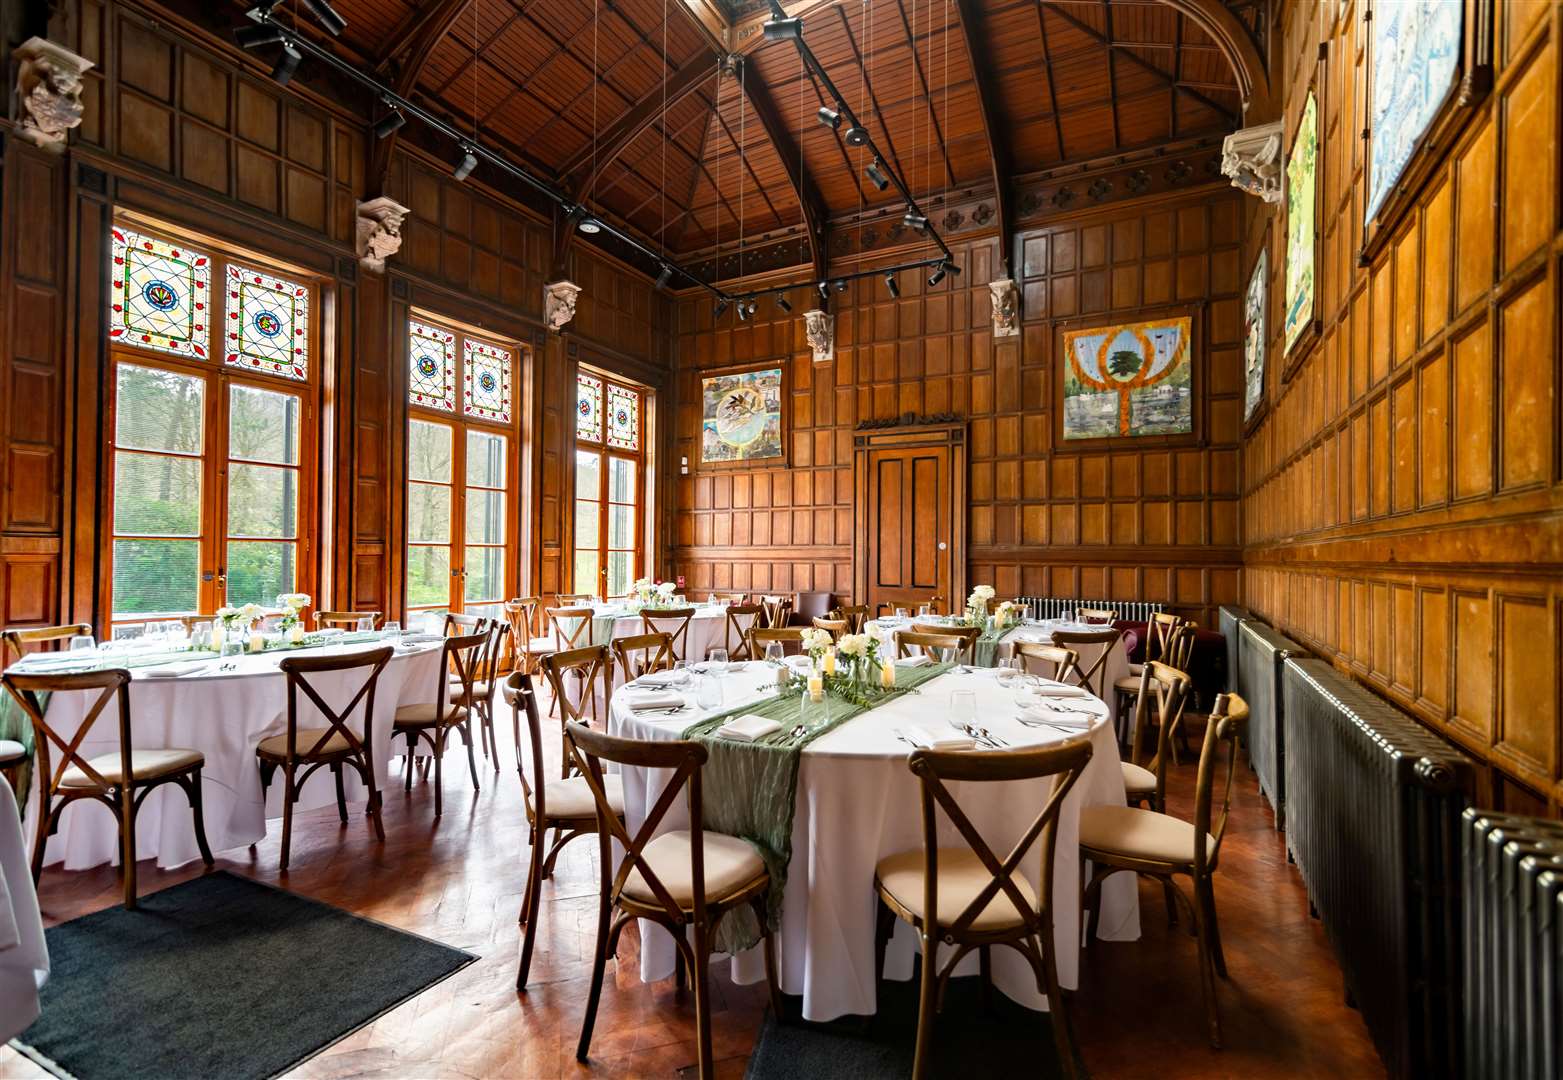 Kearsney Abbey's historic Billiards Room has become a wedding venue. Picture: Dover Media Group